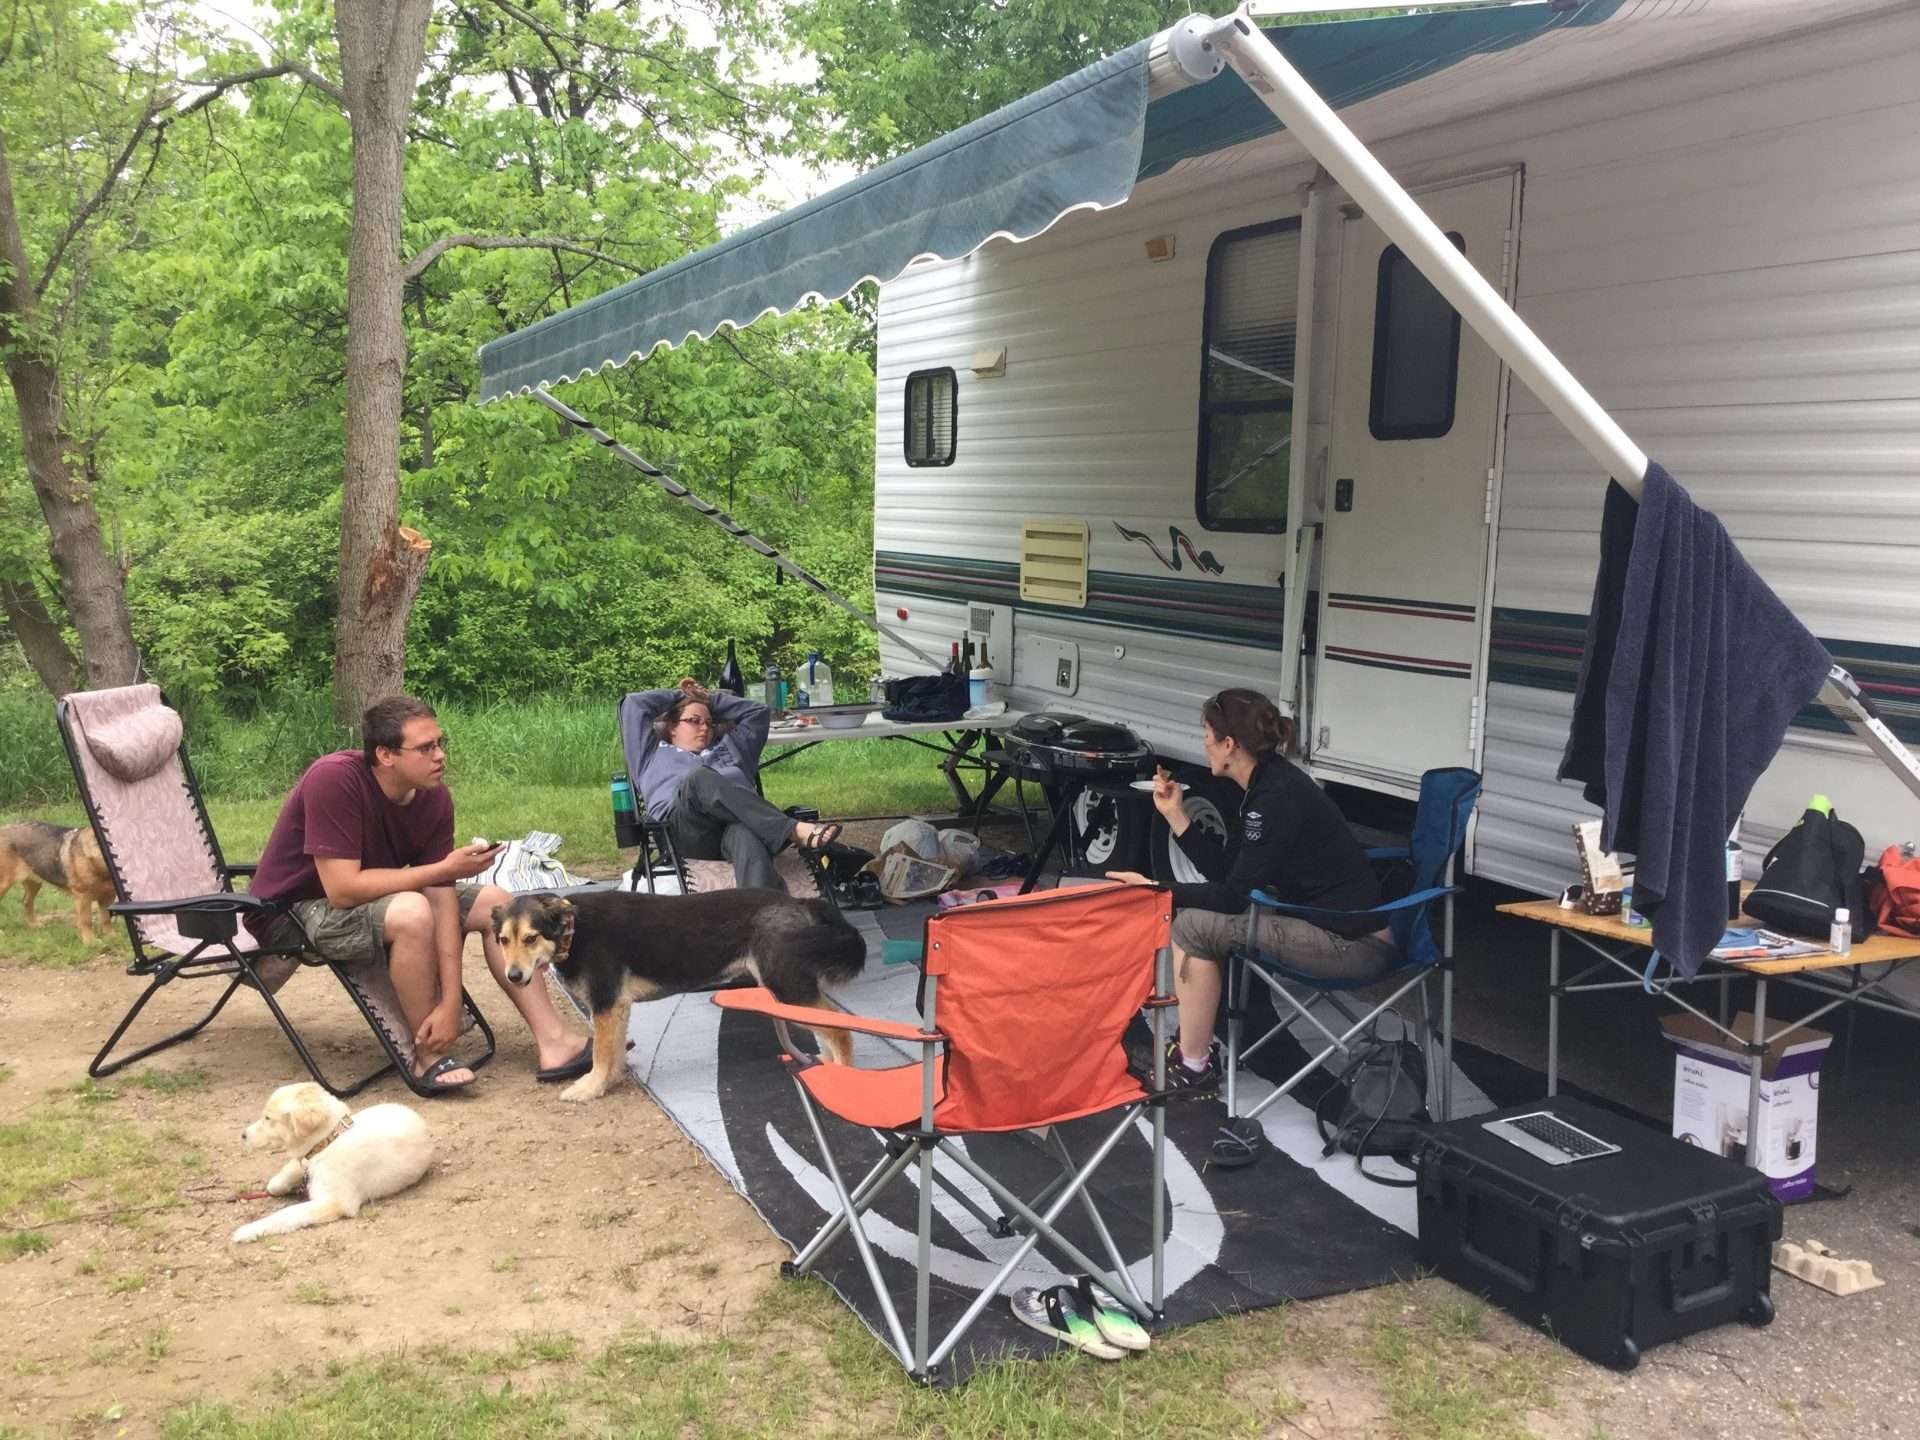 Mortons on the Move and friends sitting in front of RV camping